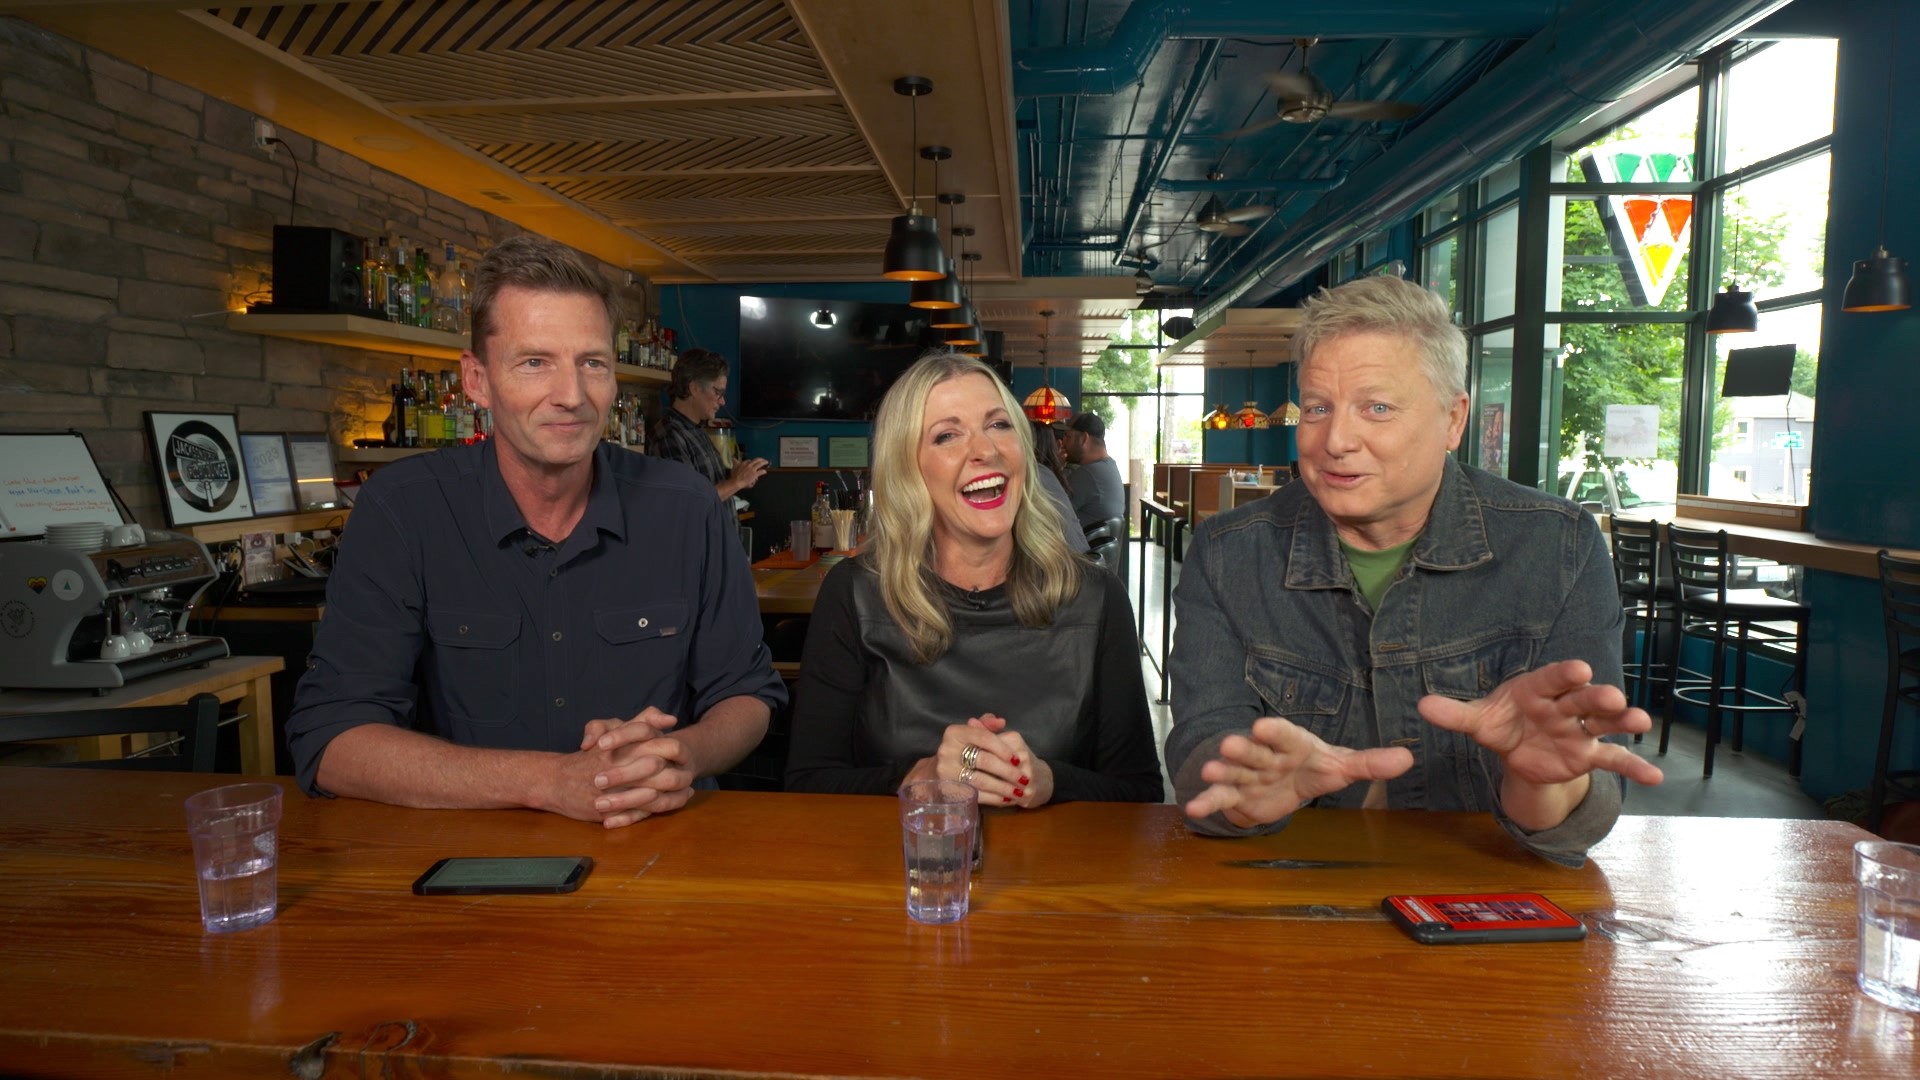 Evening hosts share what they are currently obsessed with from where to eat to what to watch on TV. #k5evening